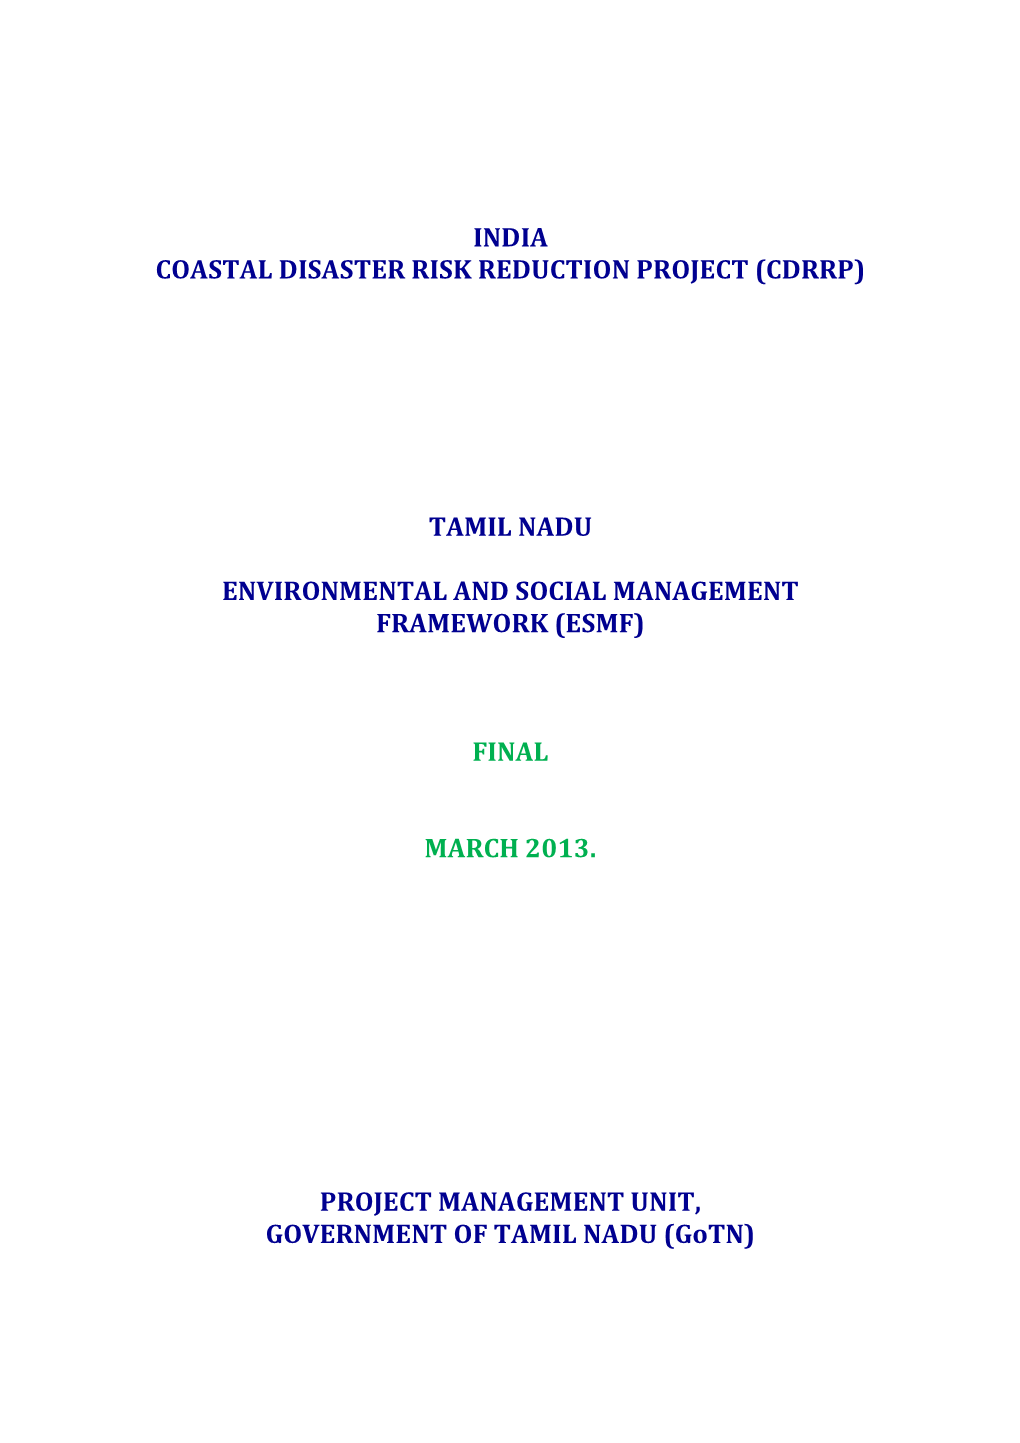 India Coastal Disaster Risk Reduction Project (Cdrrp)